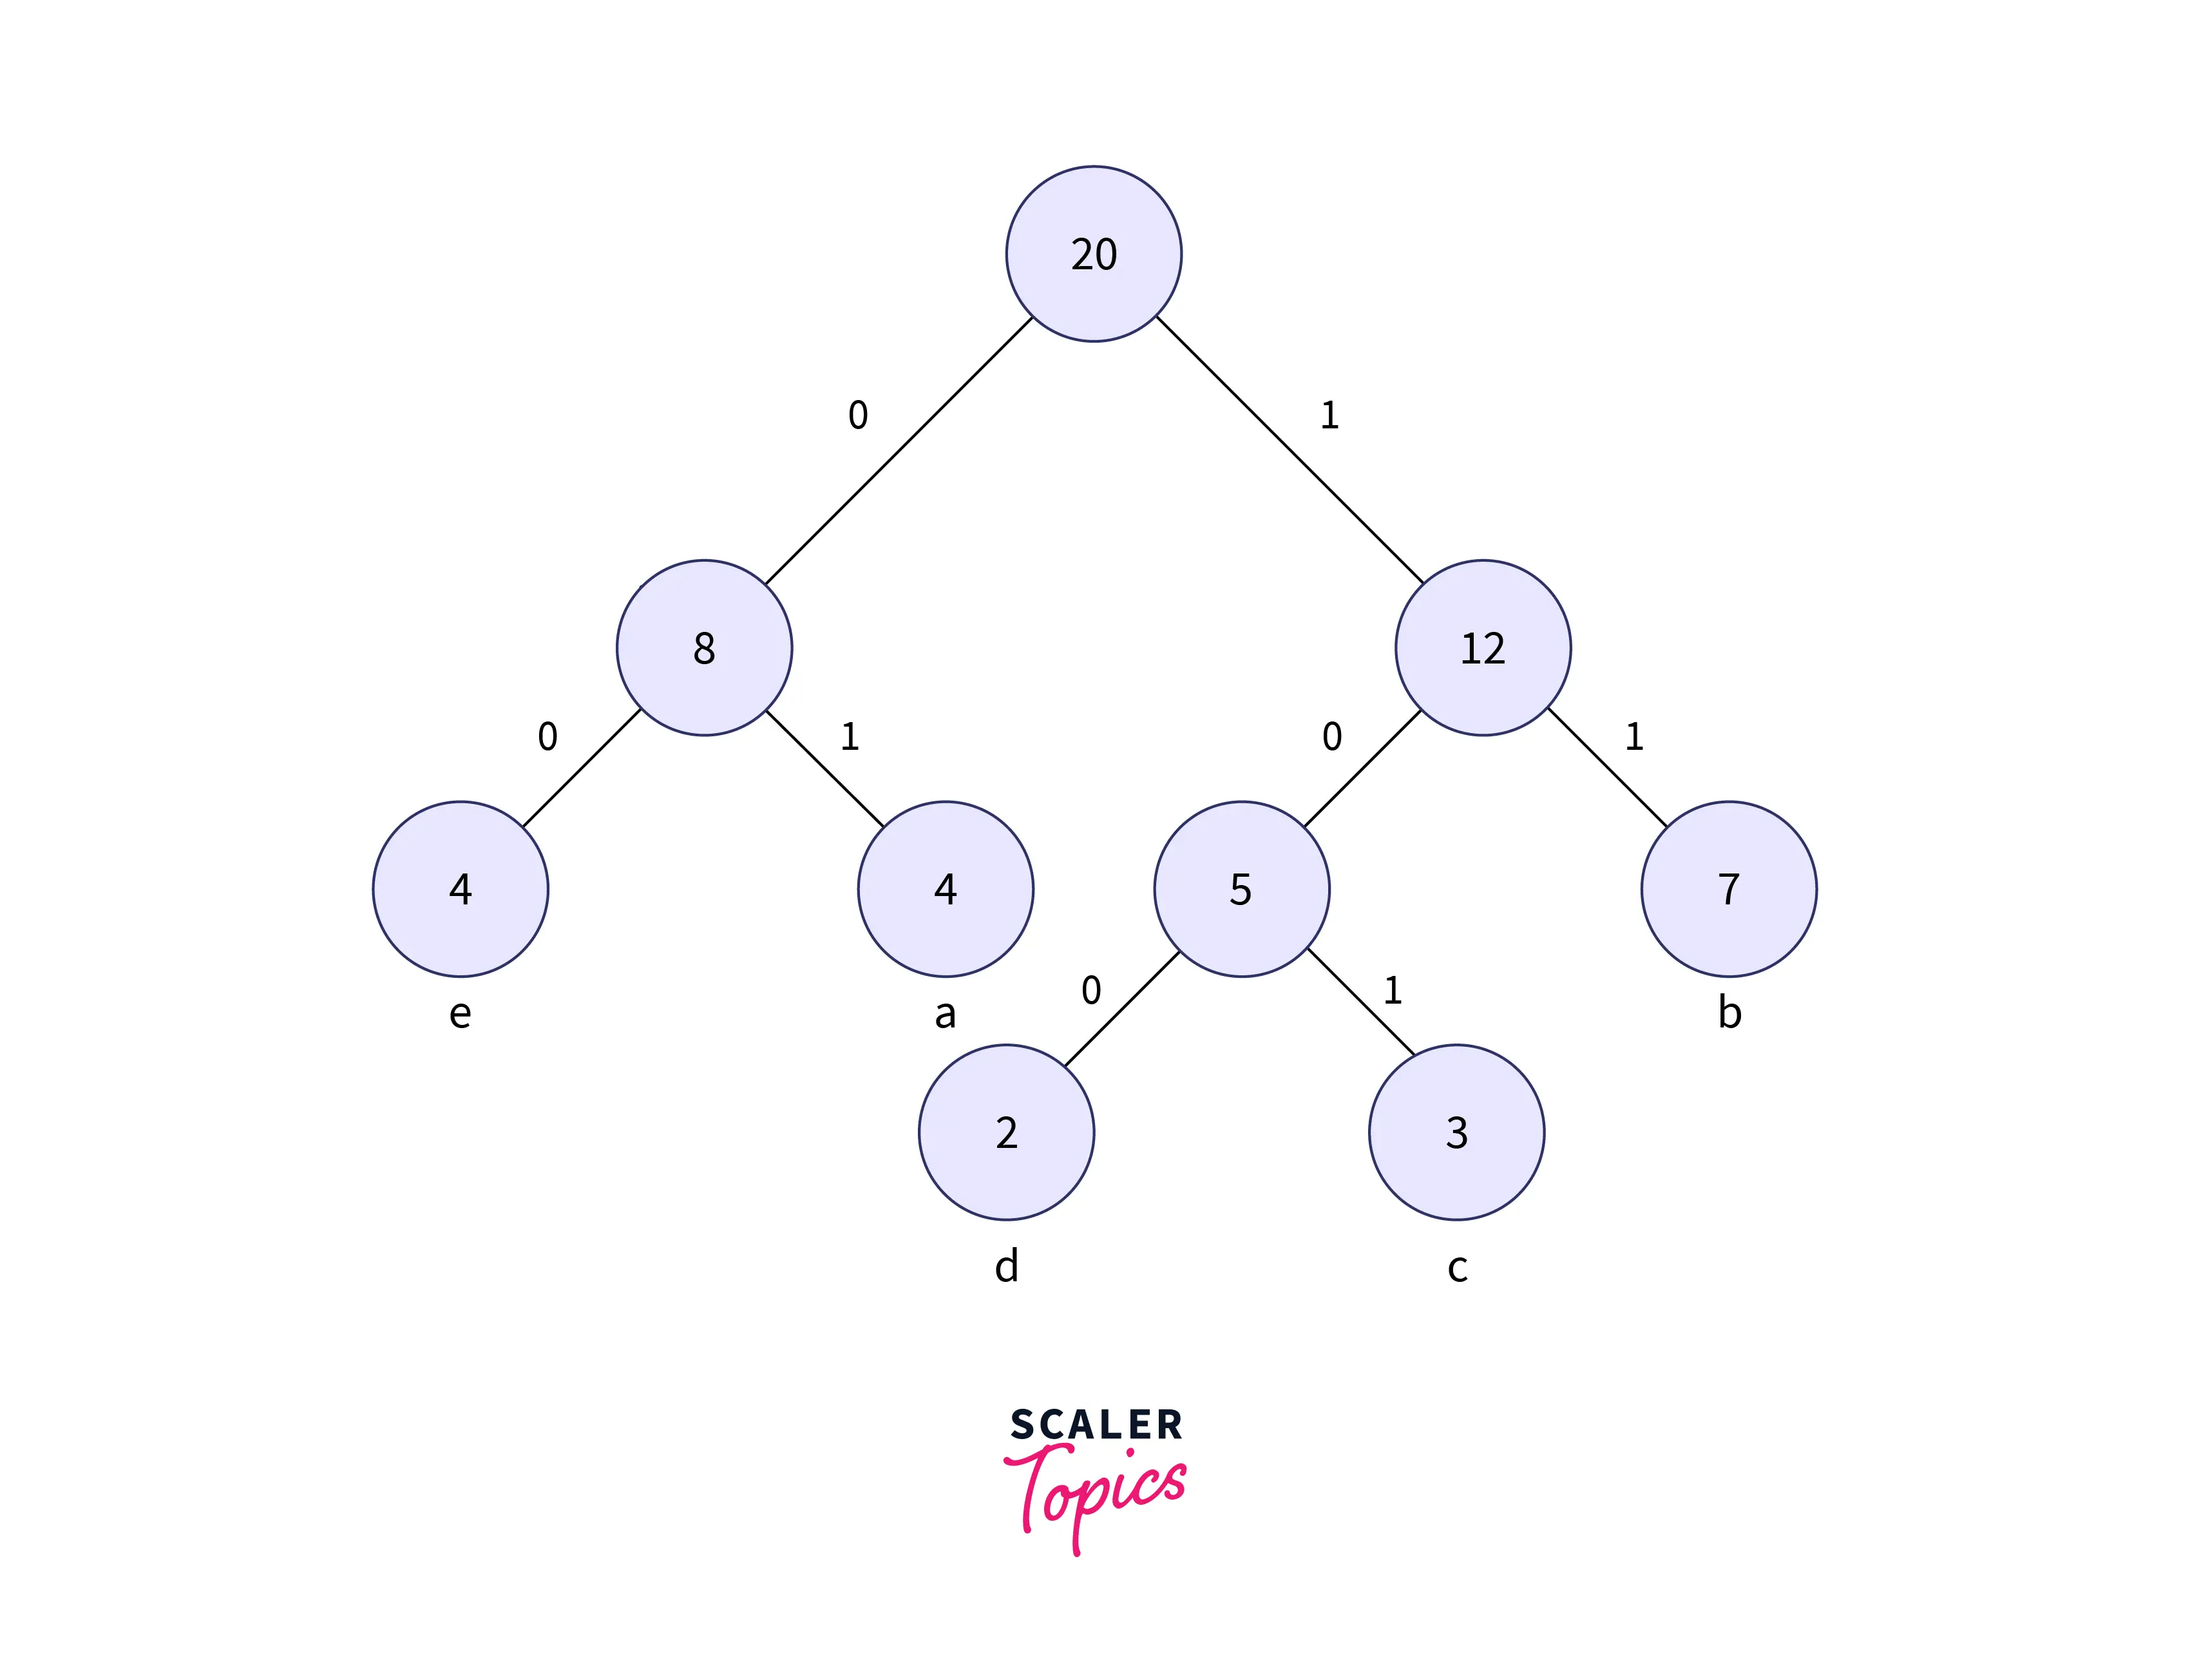 modified-huffman-tree-after-assigning-the-weights